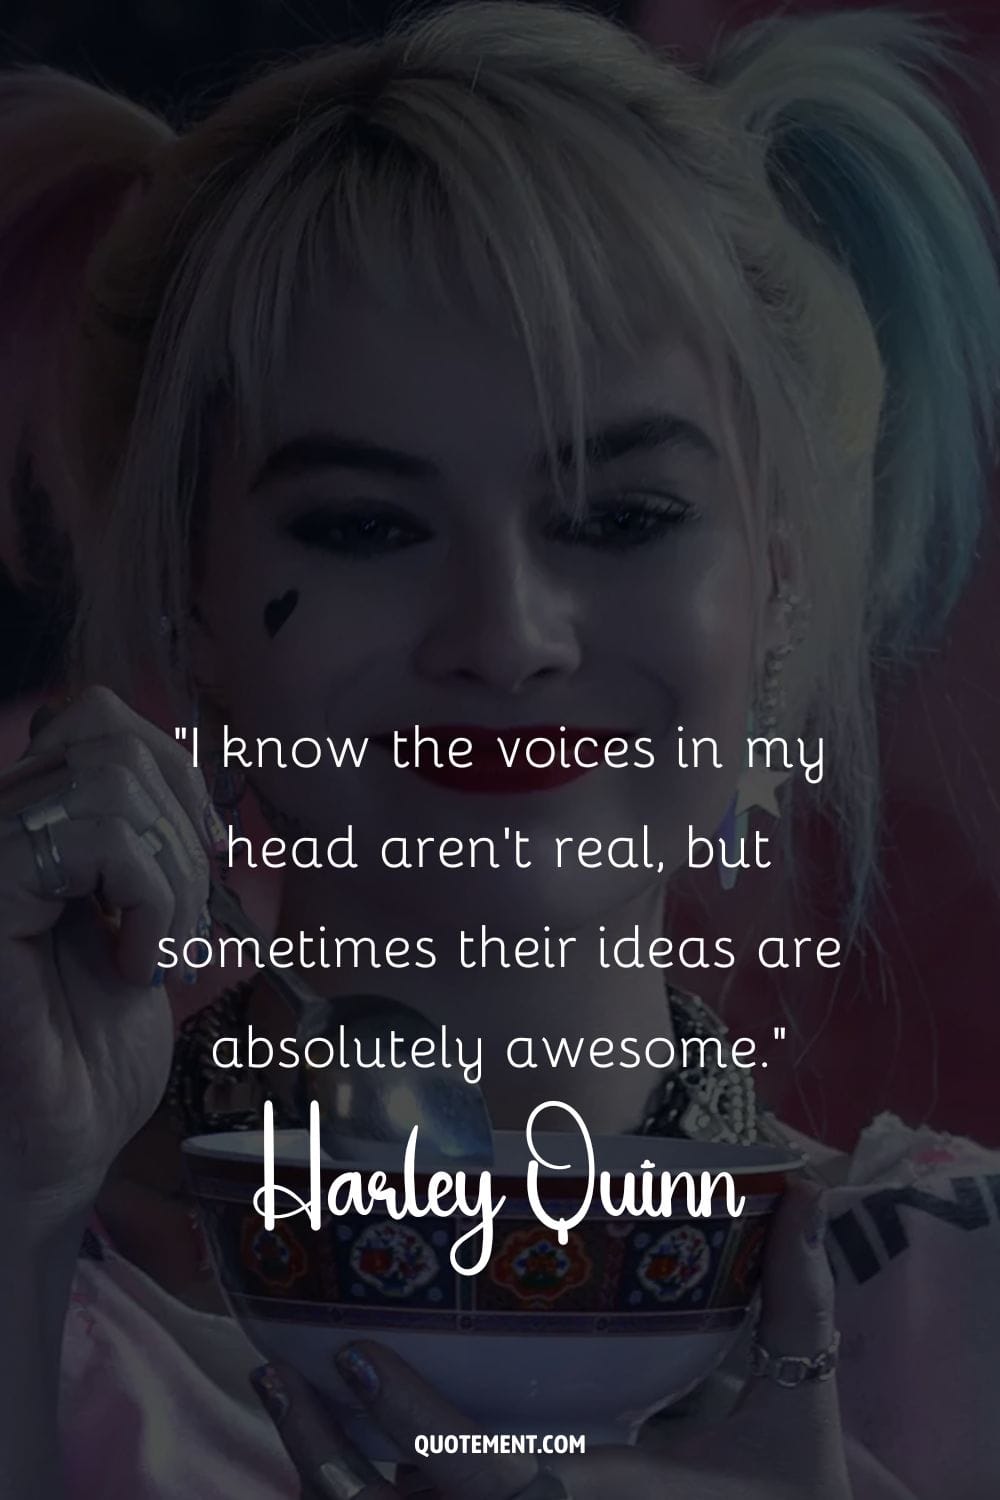 Harley Quinn's quirky charm and vibrant, unique personality.